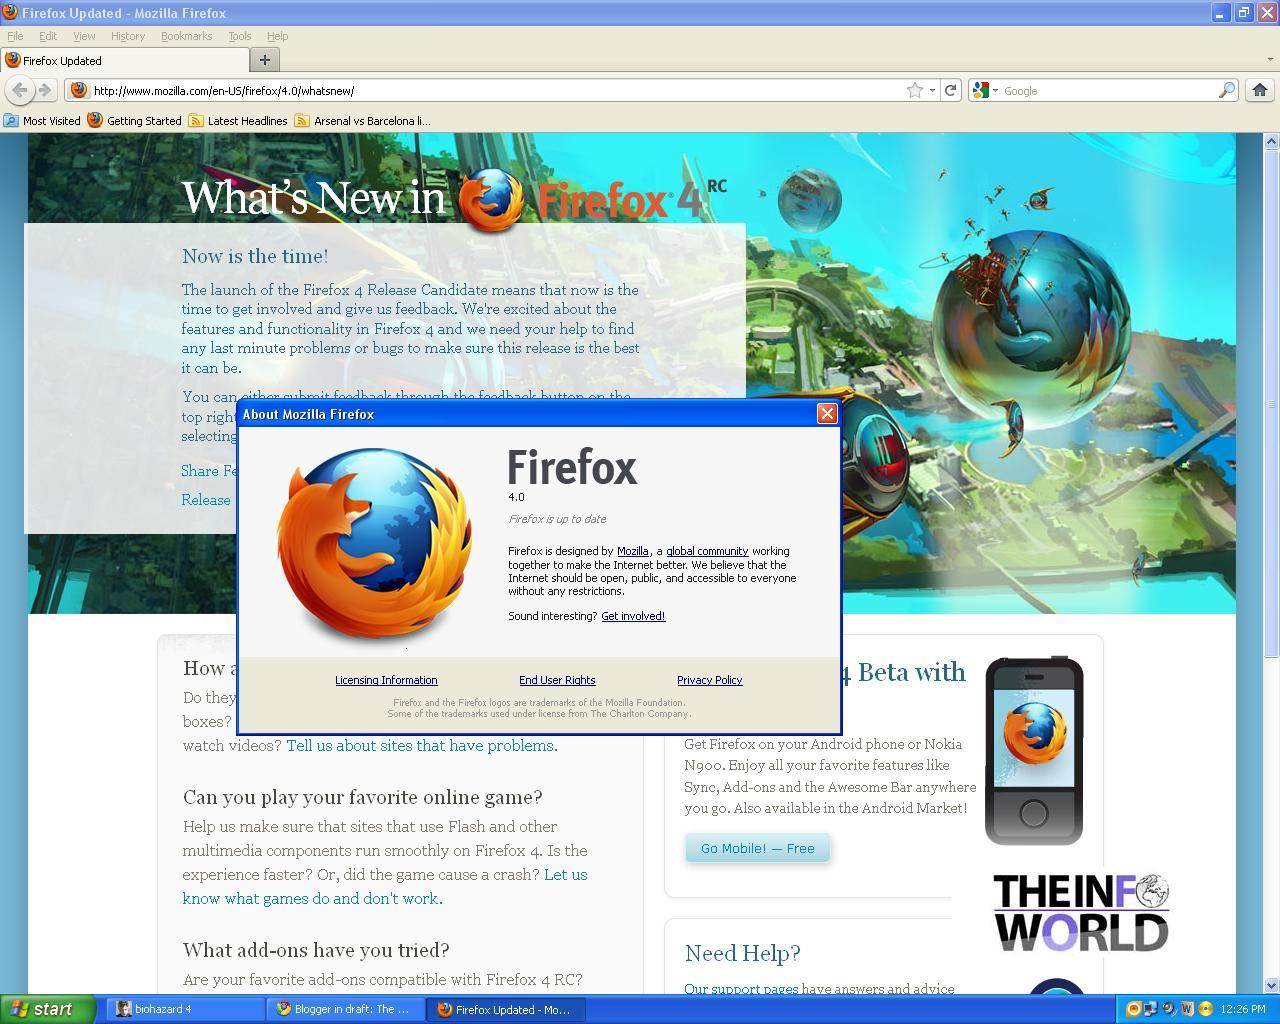 Download Final version of Firefox 4 for Windows